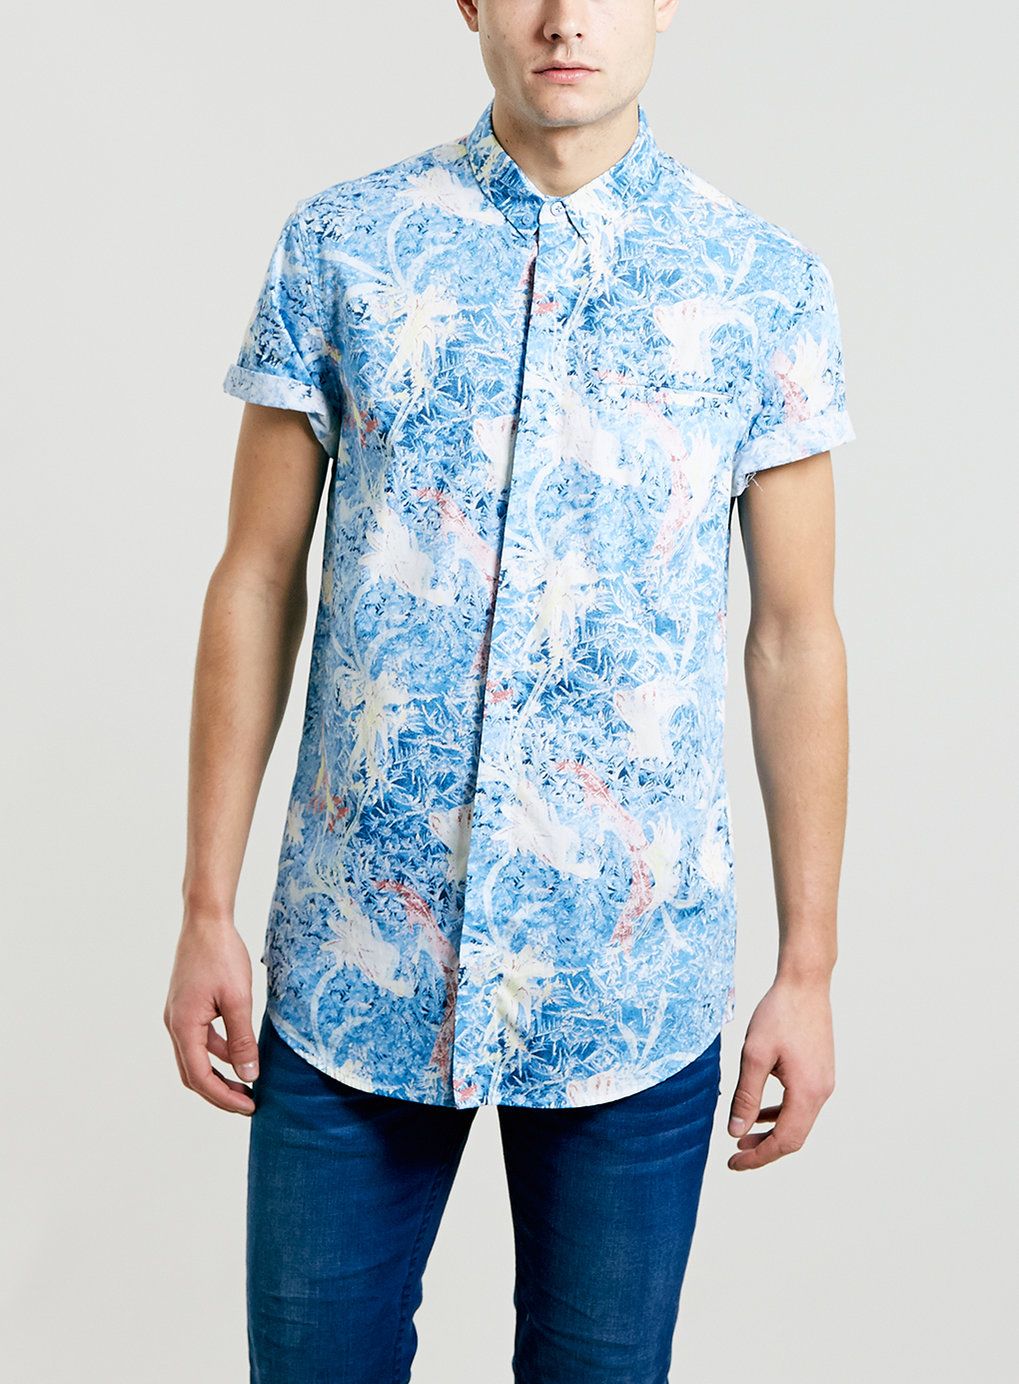 New Topman Sale: Up to 50% Off – The Fashionisto